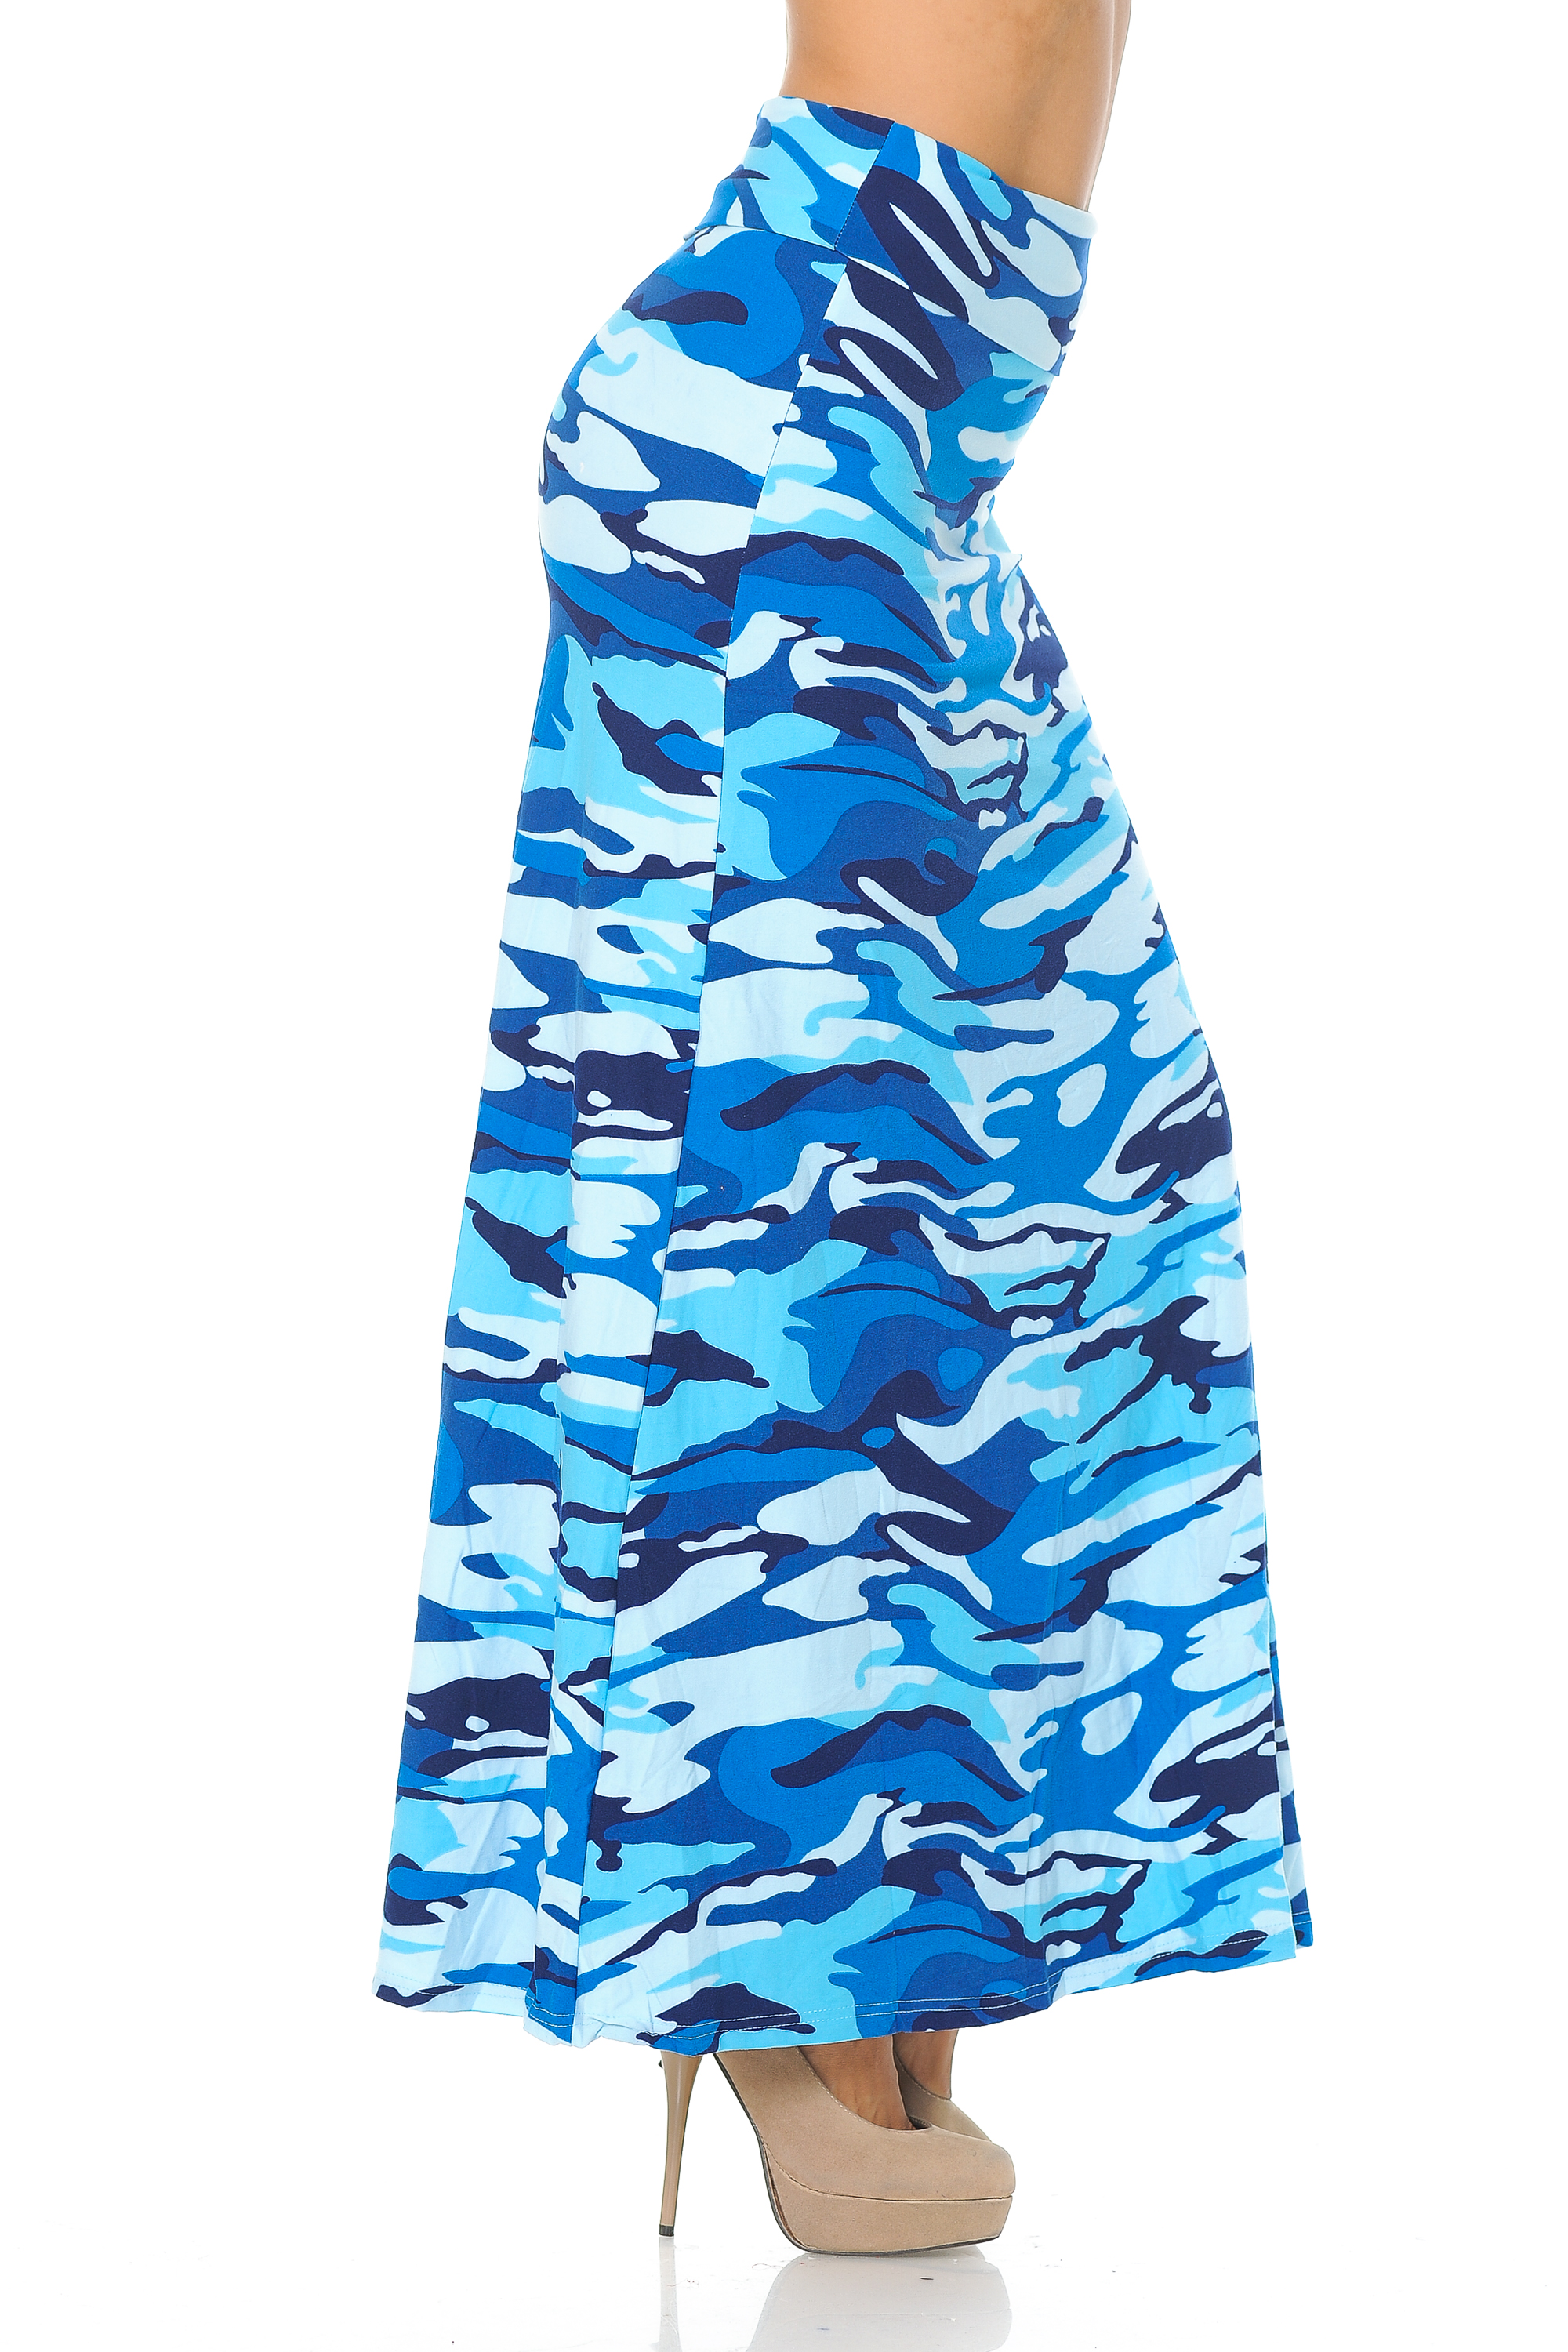 Wholesale Buttery Smooth Blue Camouflage Maxi Skirt